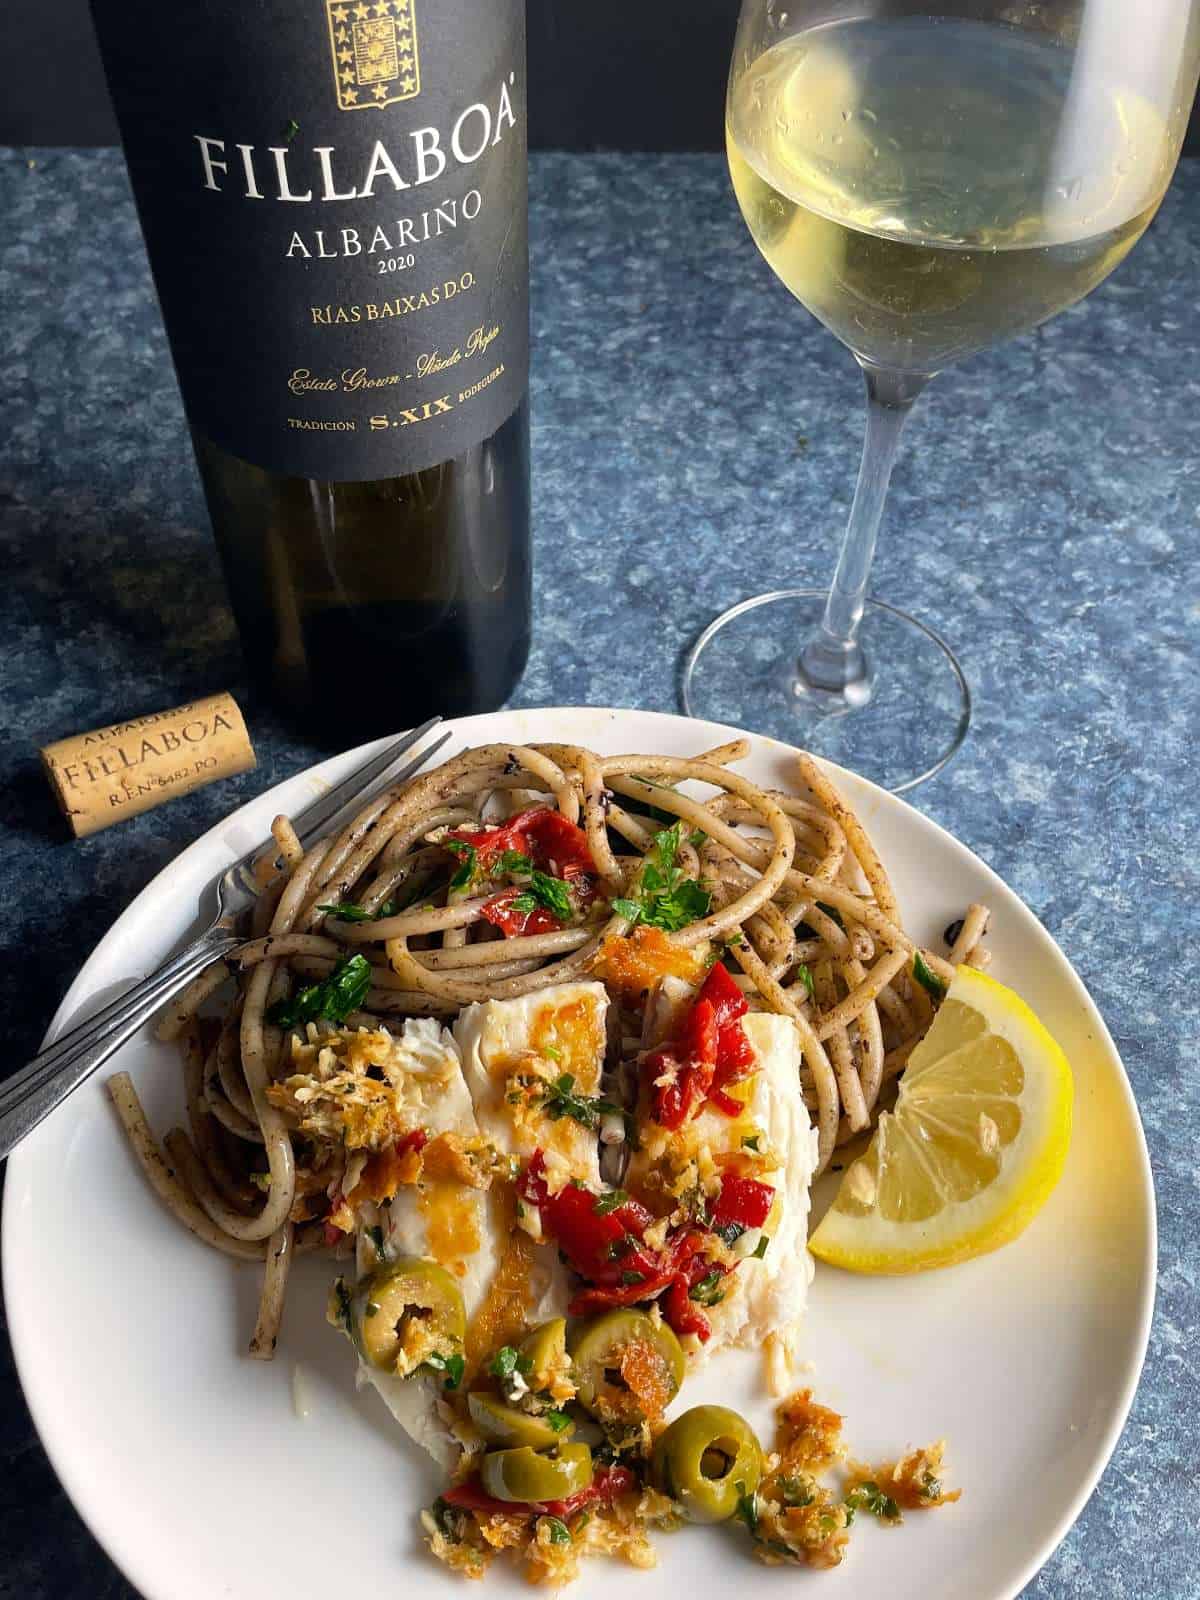 pan seared sea bass topped with olives and red peppers, served with spaghetti and a white wine.